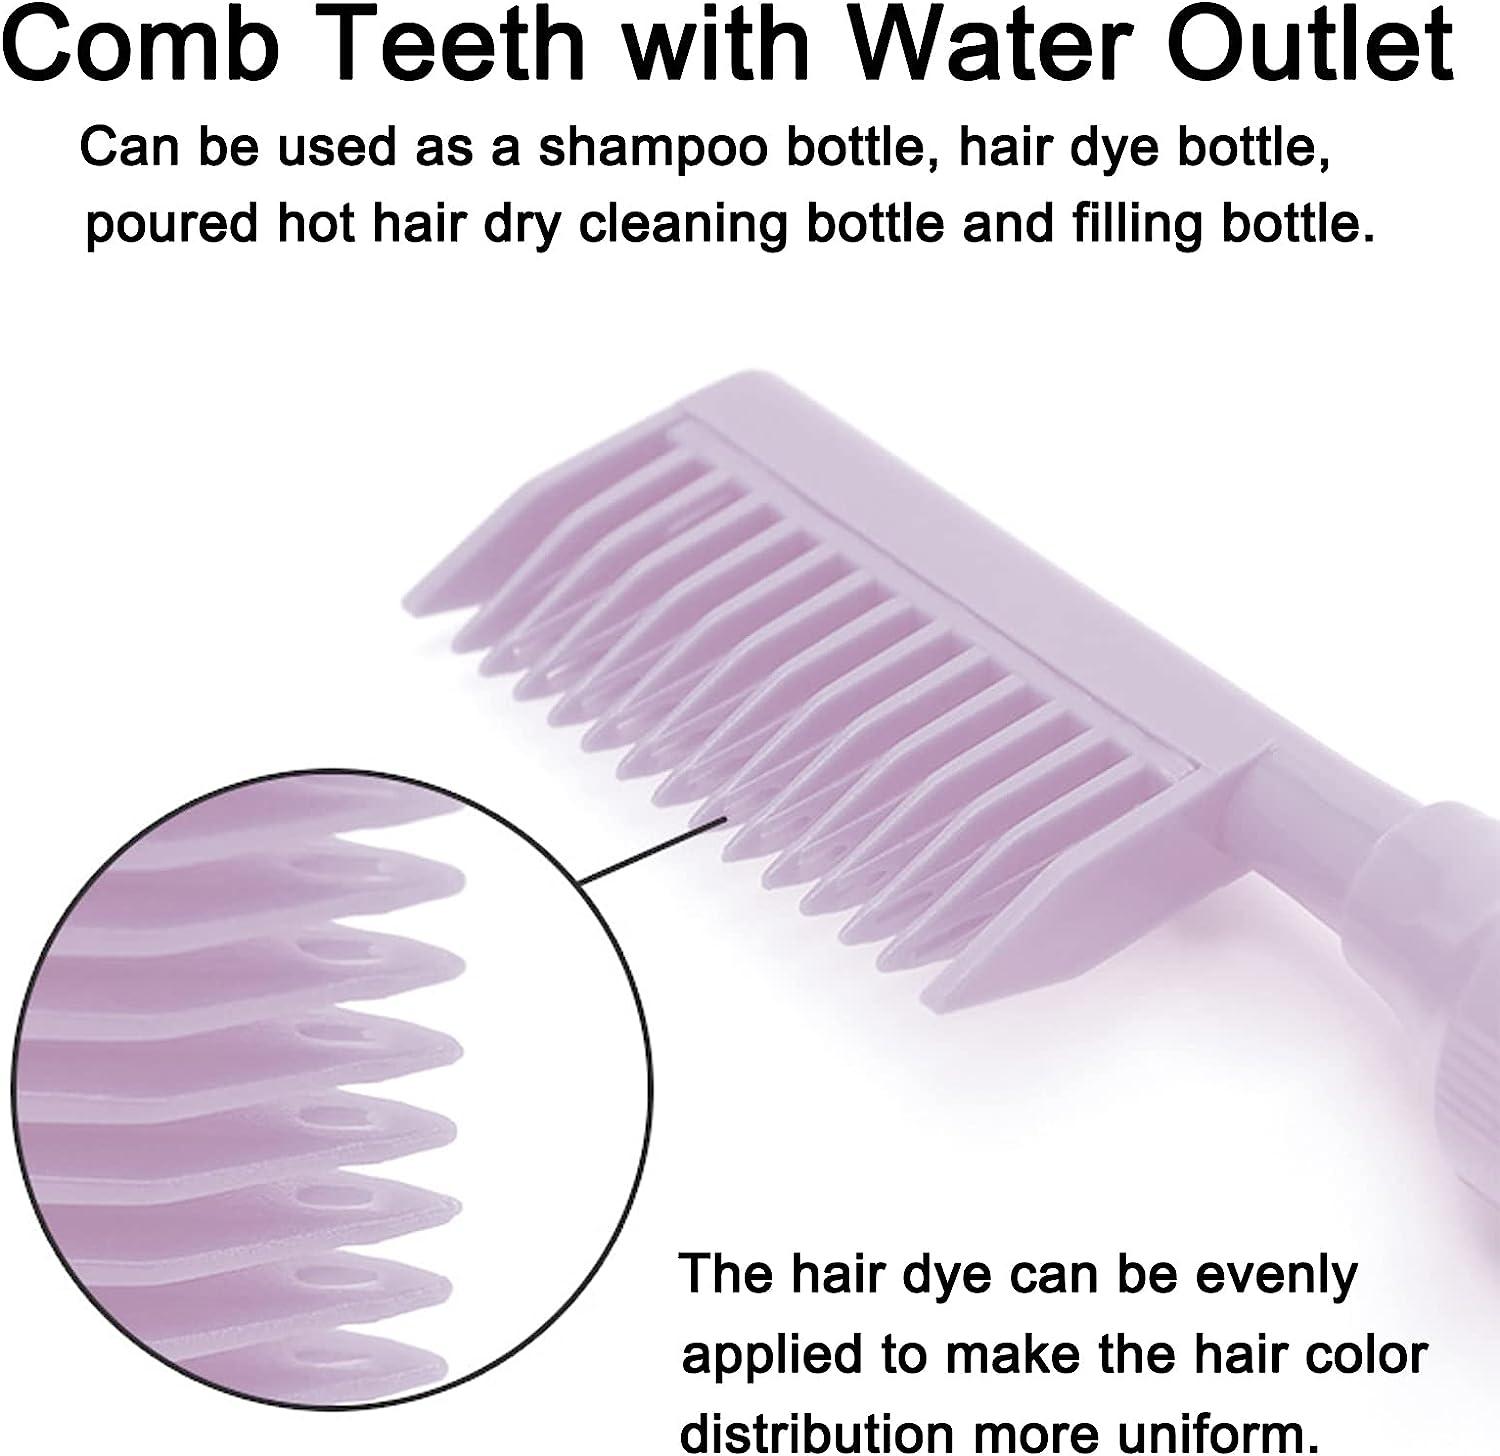 Comb Applicator Bottle, Root Comb Applicator Bottle Hair Coloring